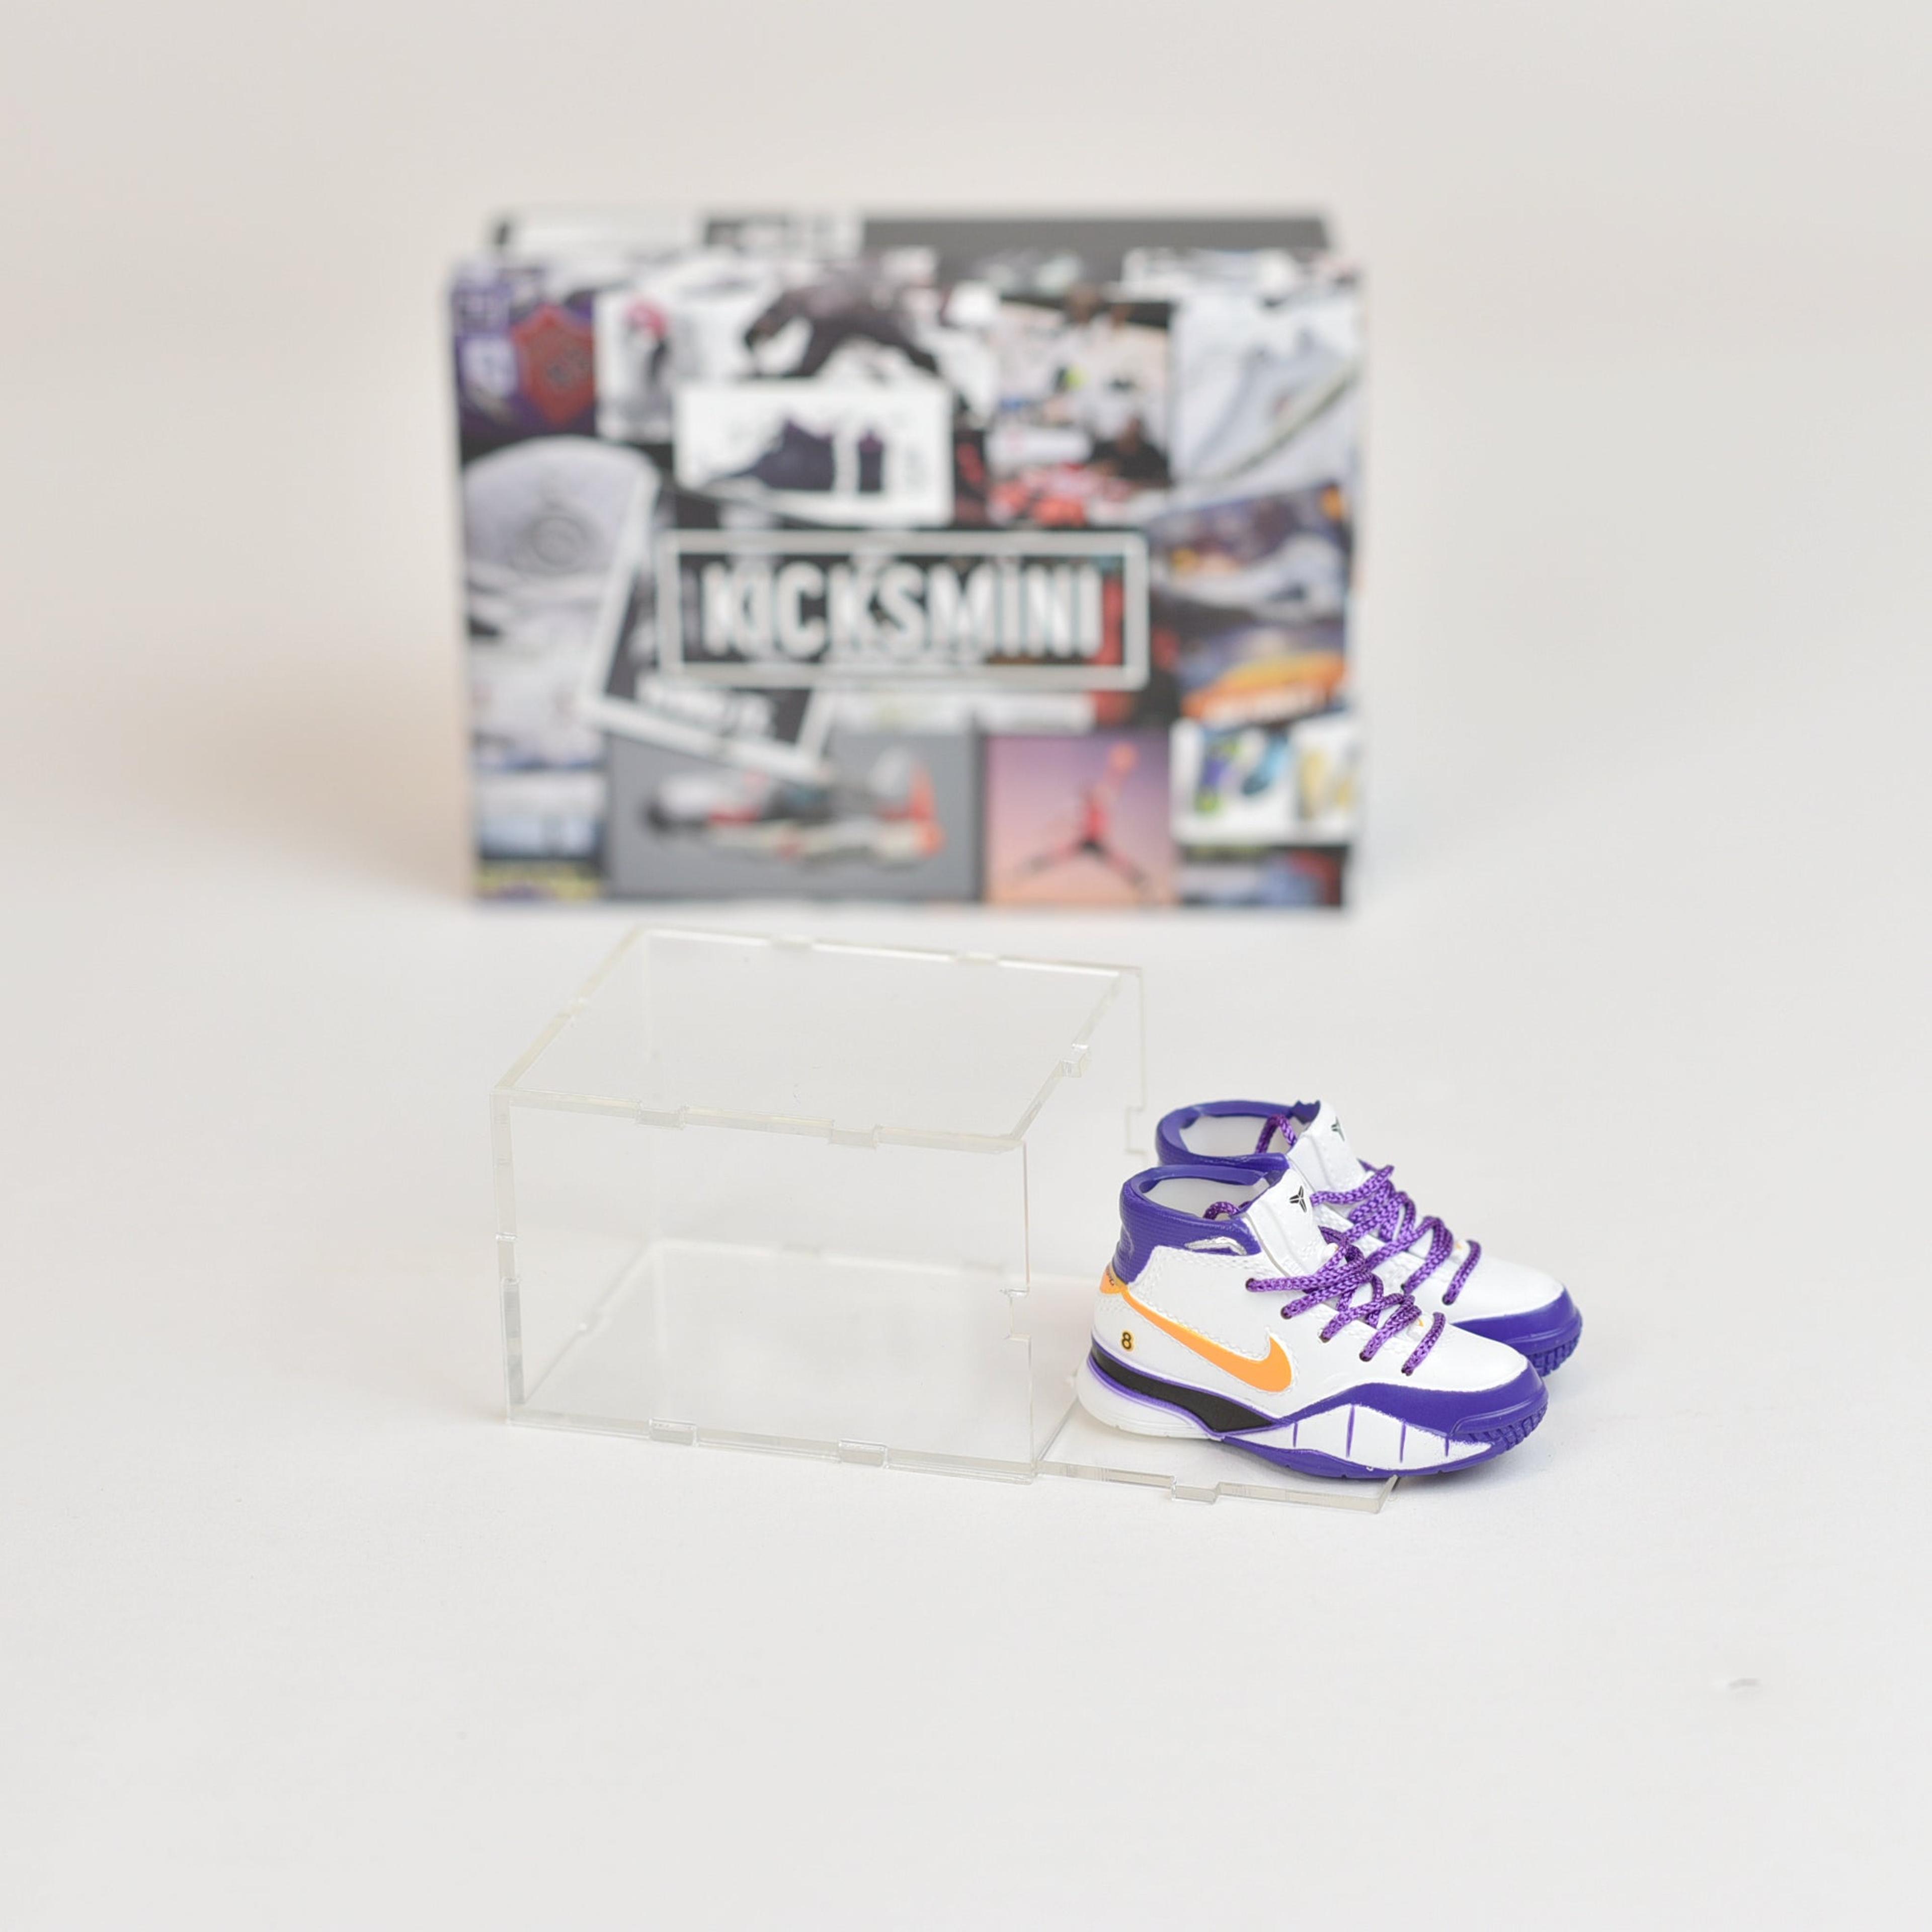 Alternate View 8 of Kobe Bryant/LeBron James/Steph Curry Mini Sneaker Collection wit